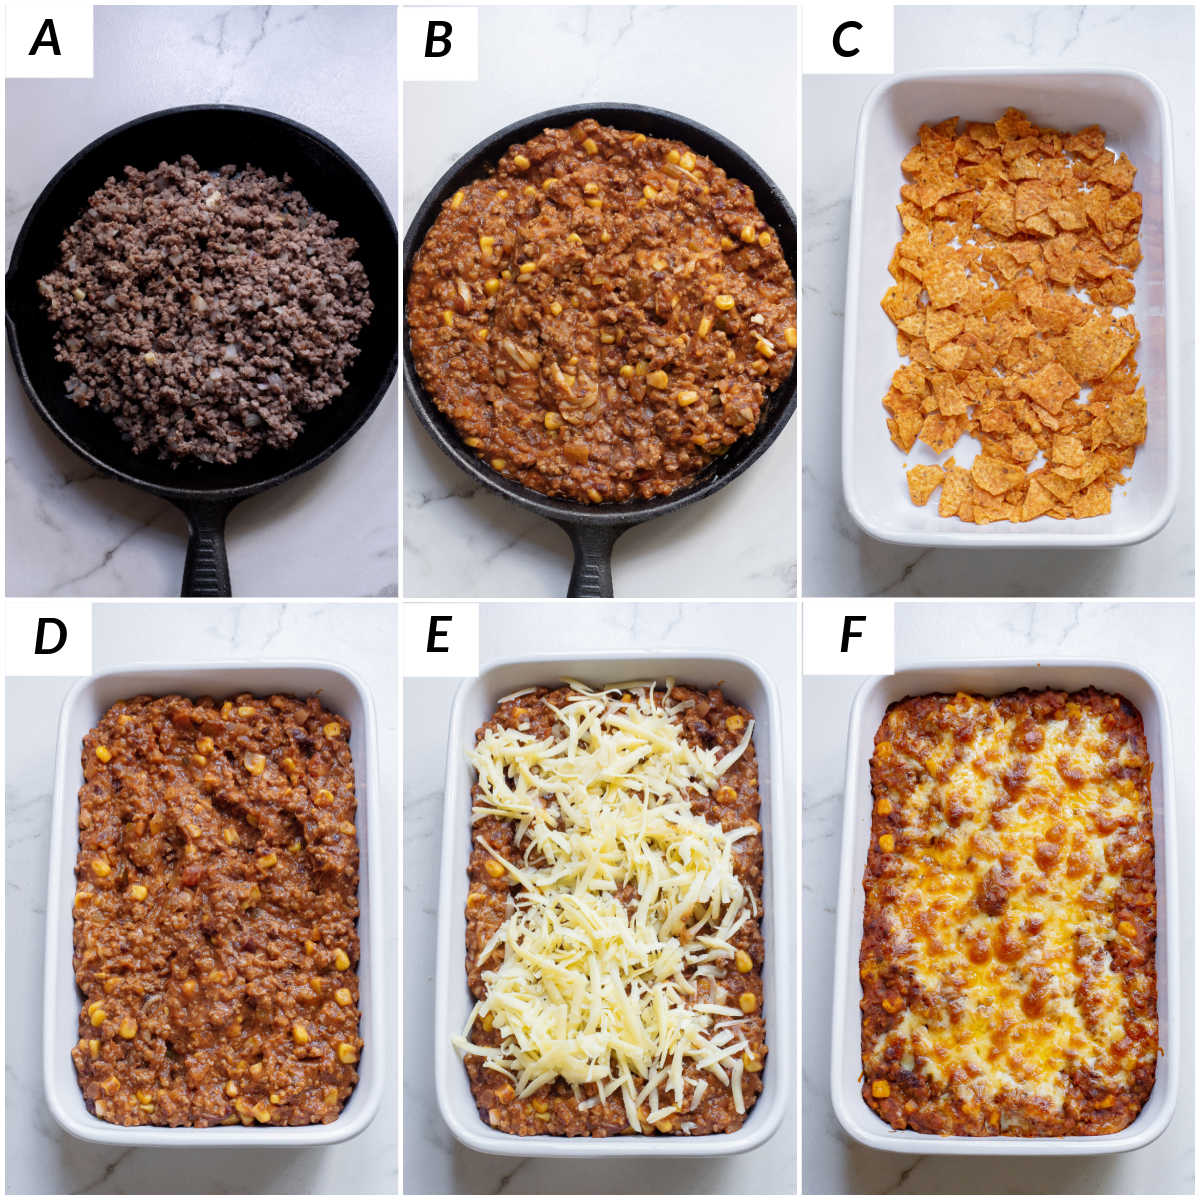 image collage showing the steps for making taco casserole